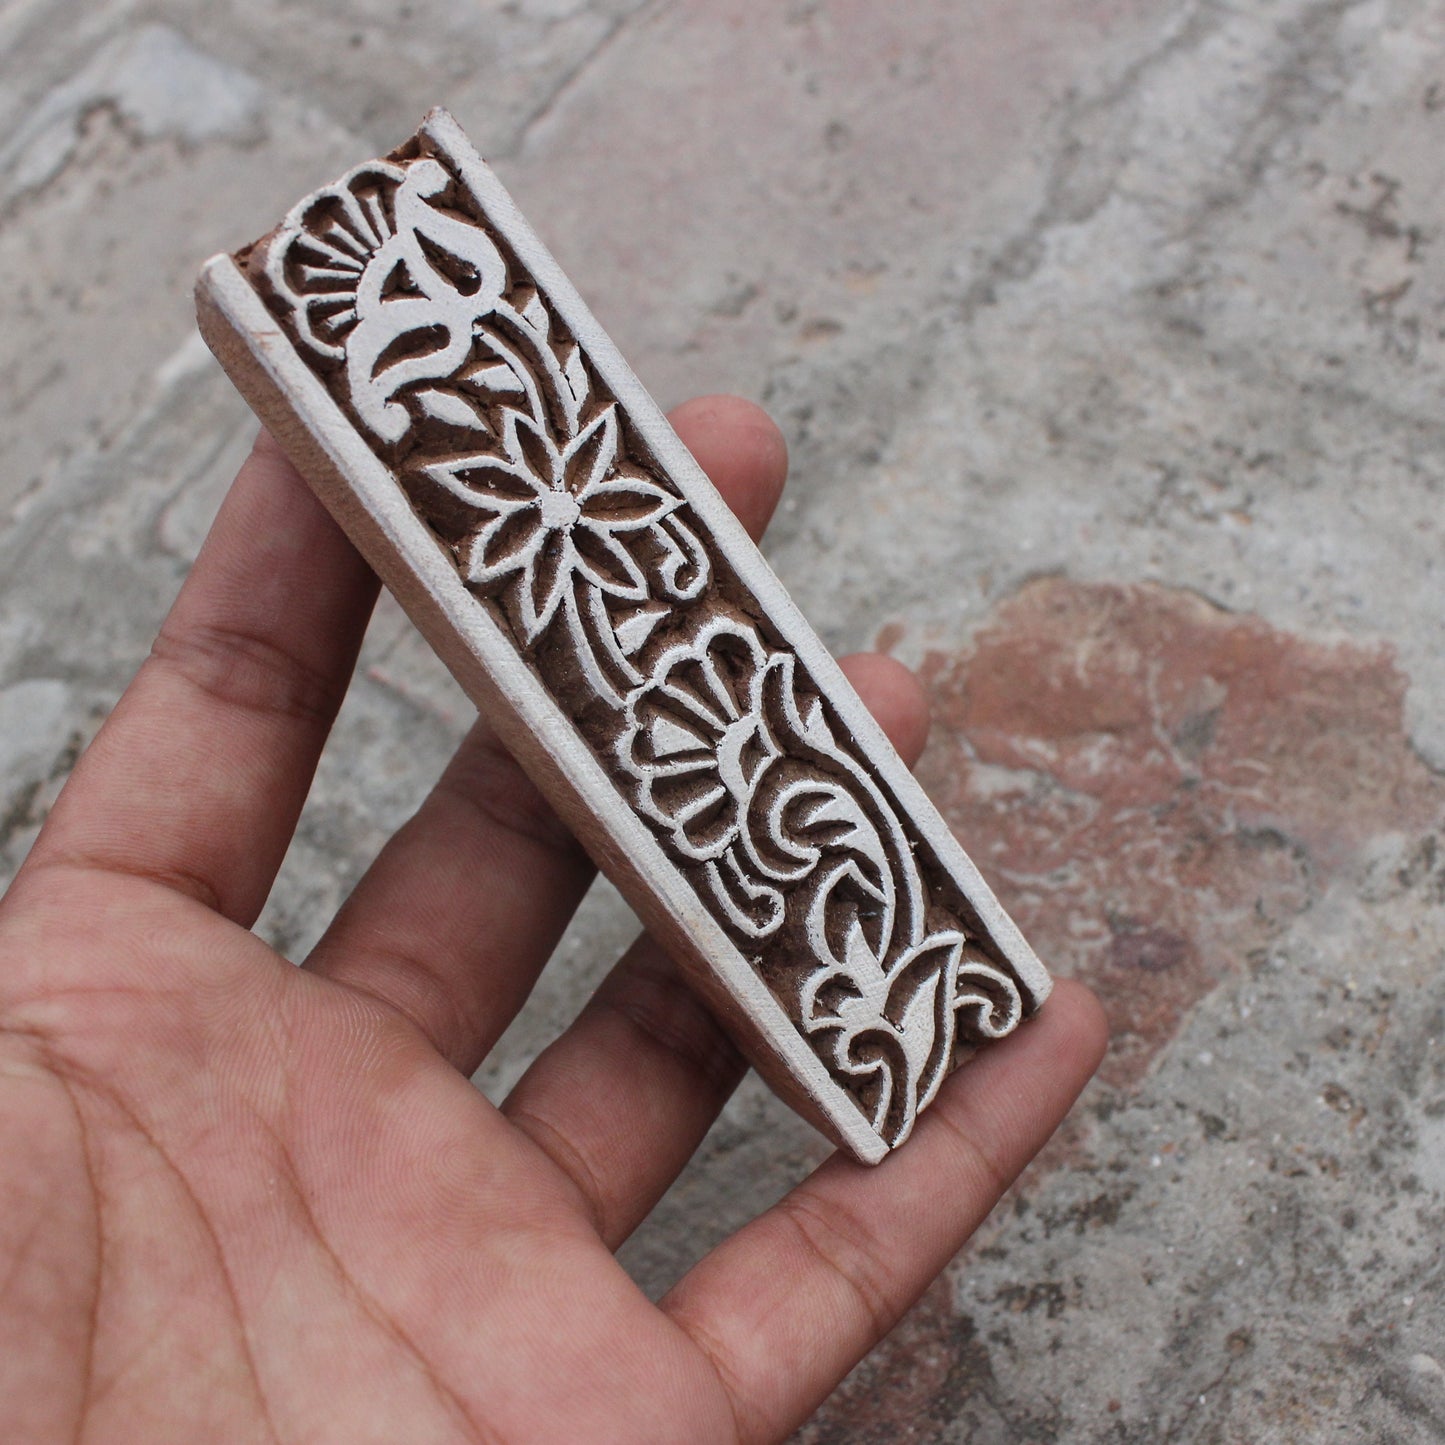 Floral Border Print Stamp Carve Block Fabric Stamp Ethnic Border Stamp Hand Carved Textile Block For Printing Traditional Soap Making Stamp